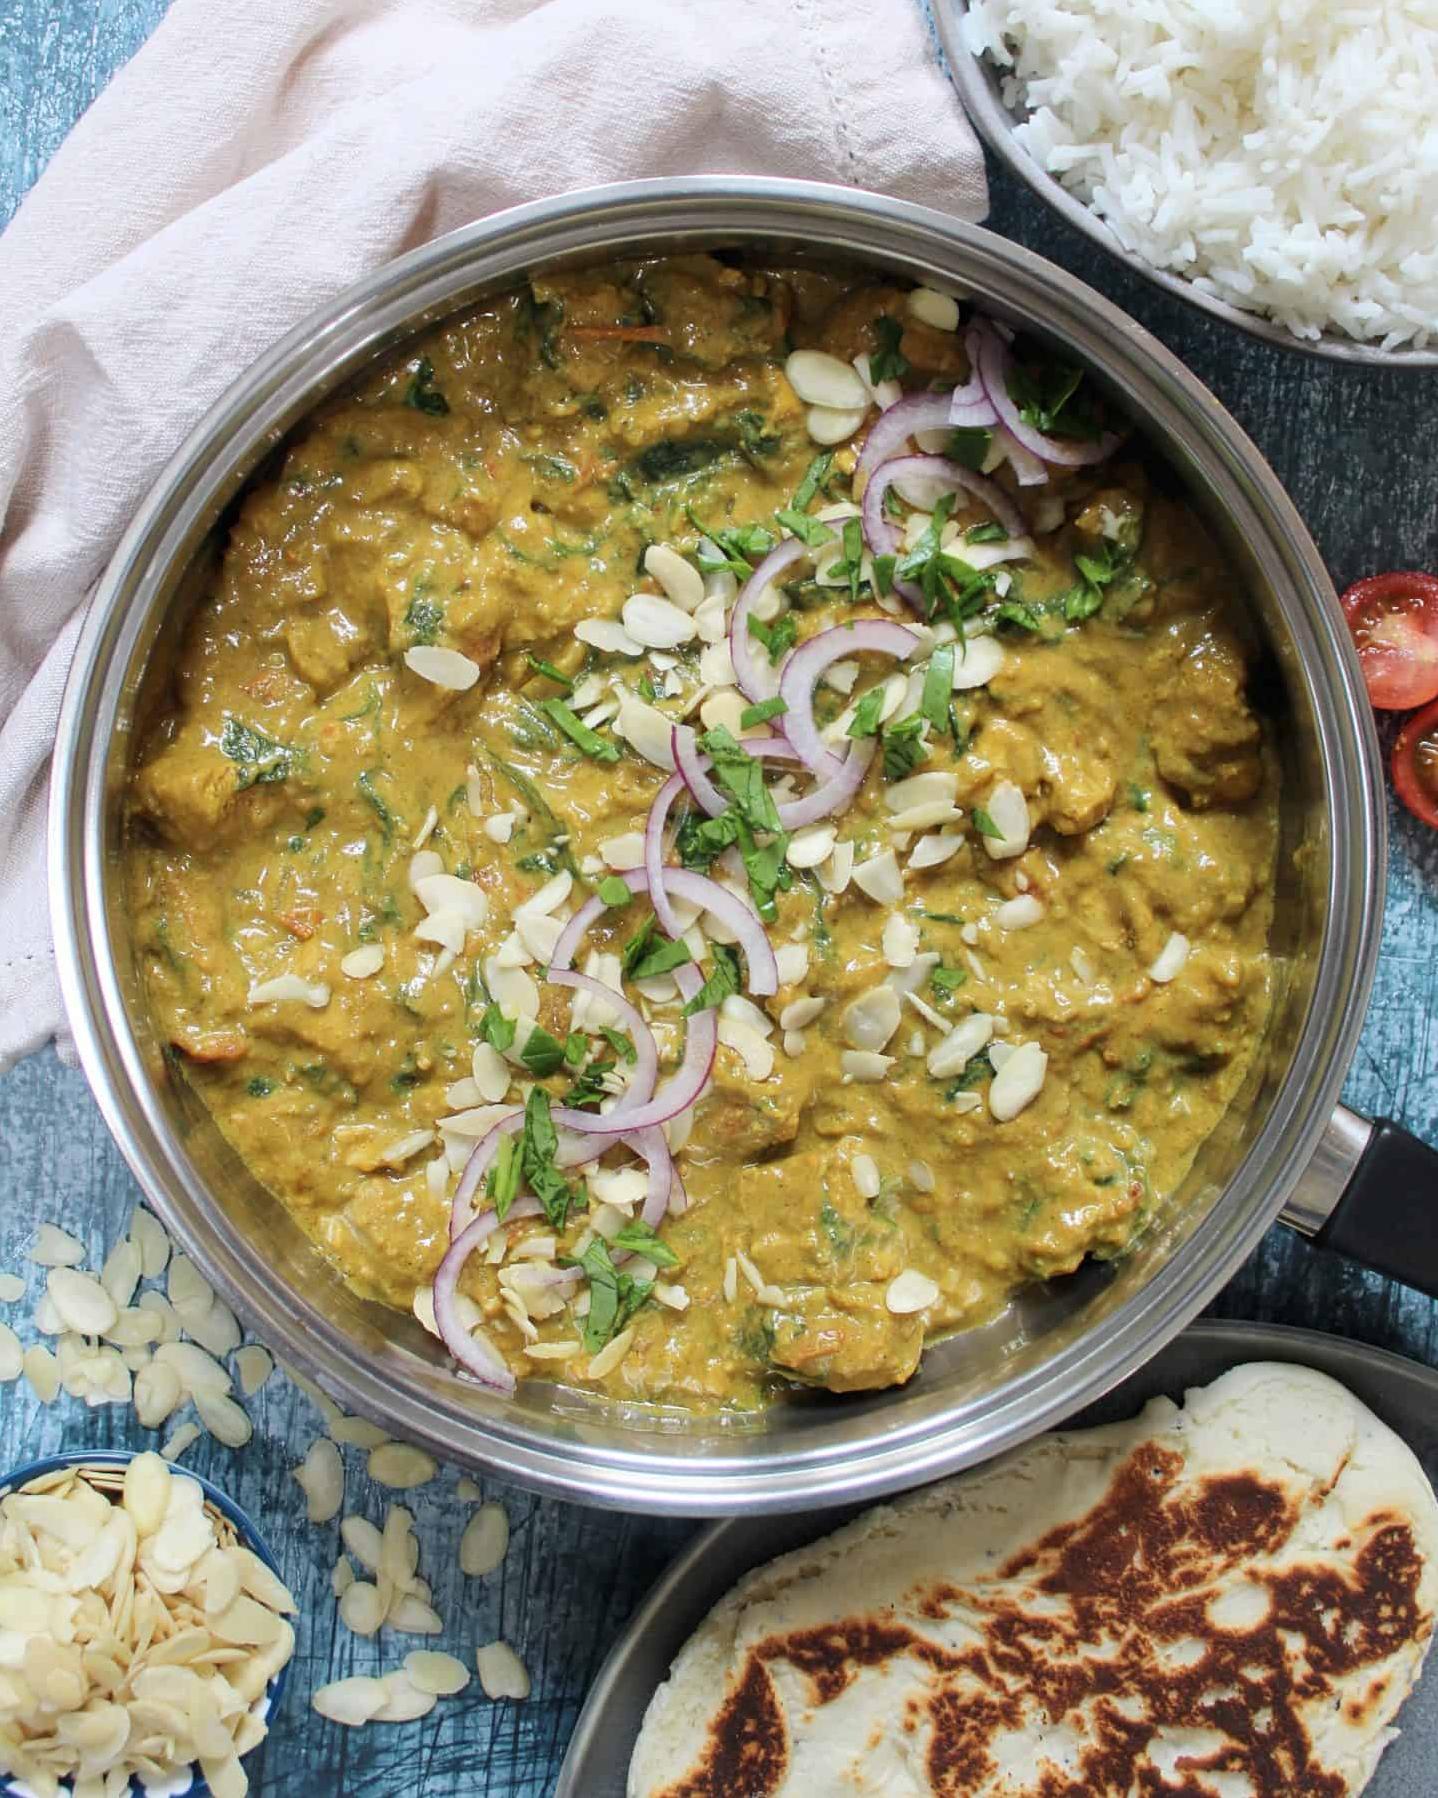  This chicken curry is so good, it'll make your taste buds do the happy dance.